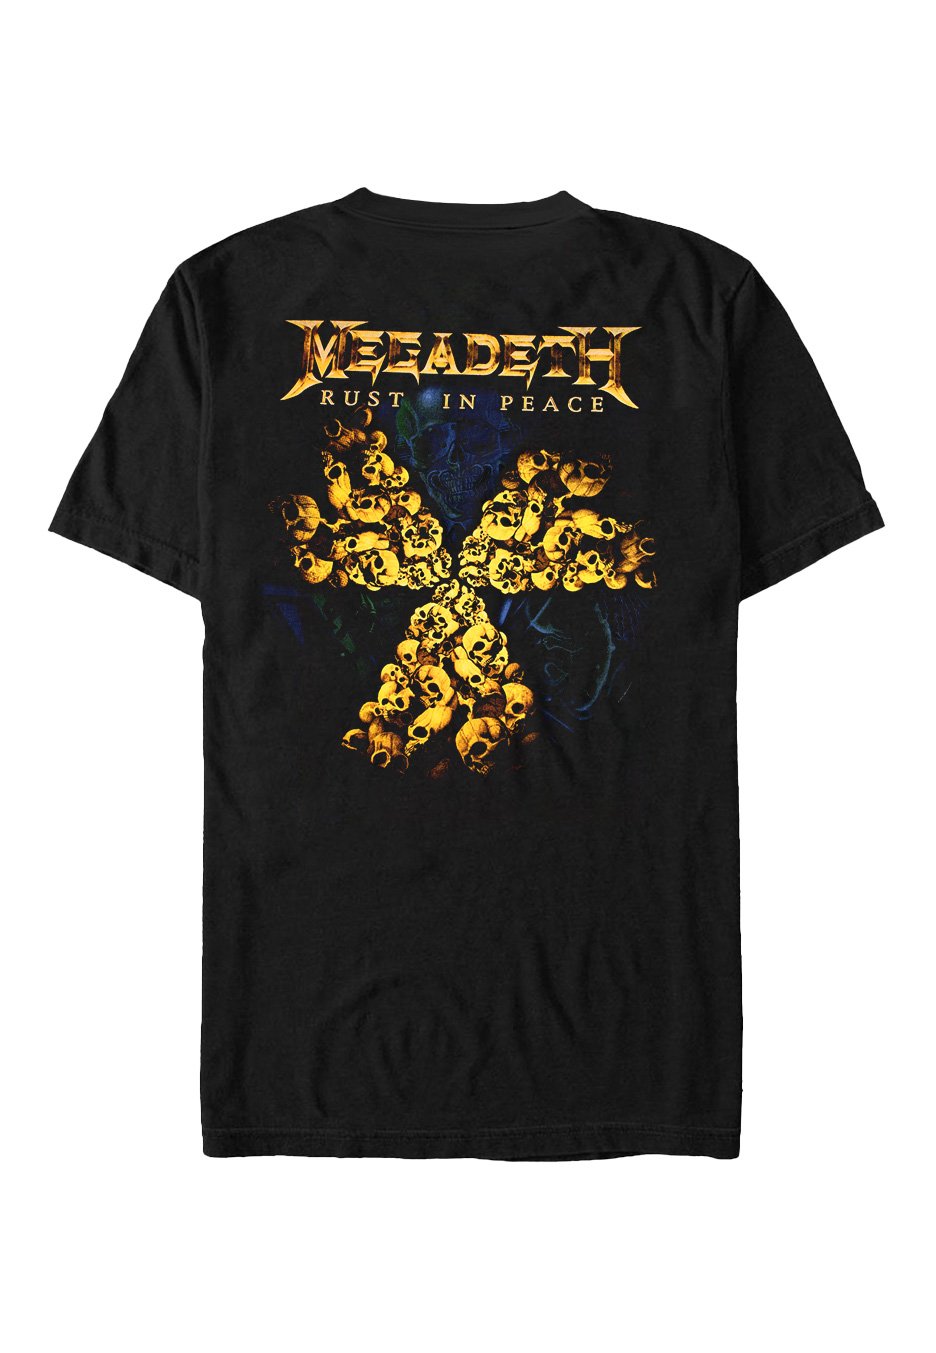 Megadeth - Rust In Peace 30th Anniversary - T-Shirt